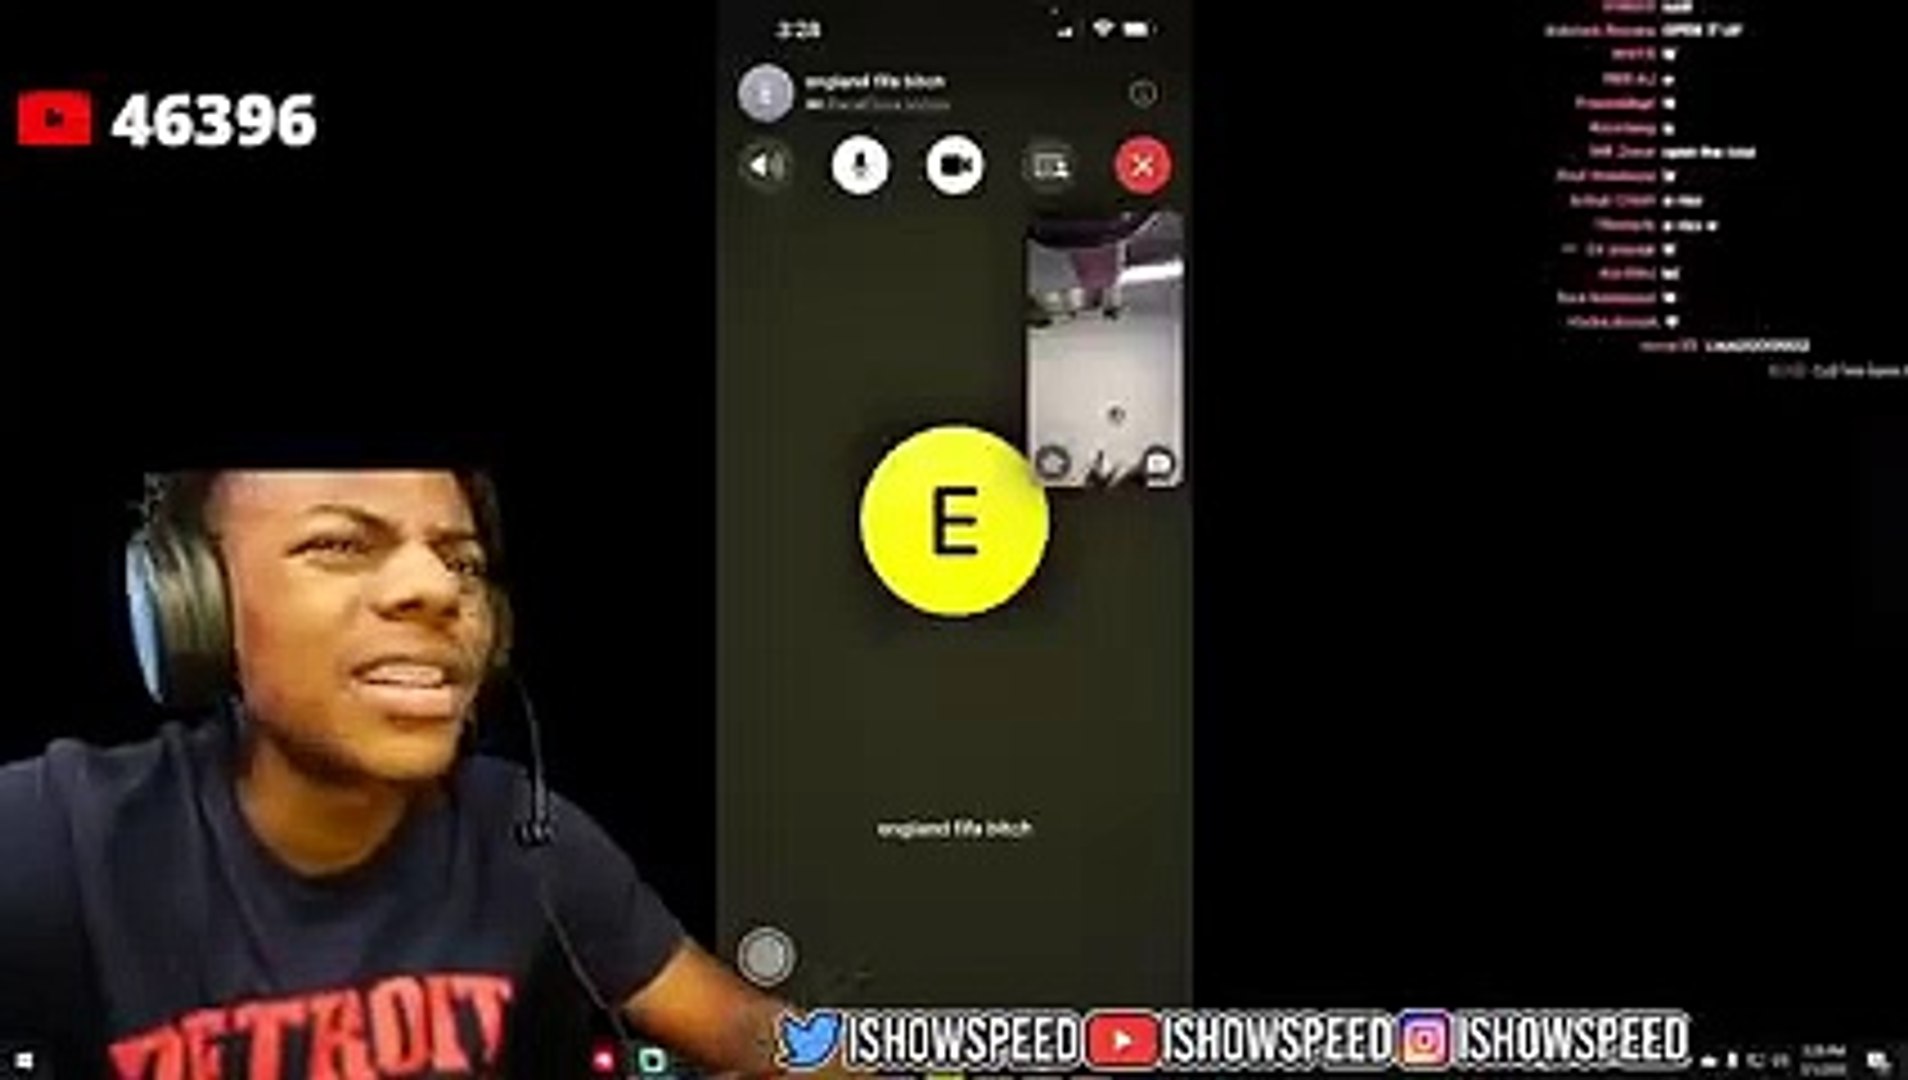 Dexerto on X: IShowSpeed accidentally flashed his viewers during